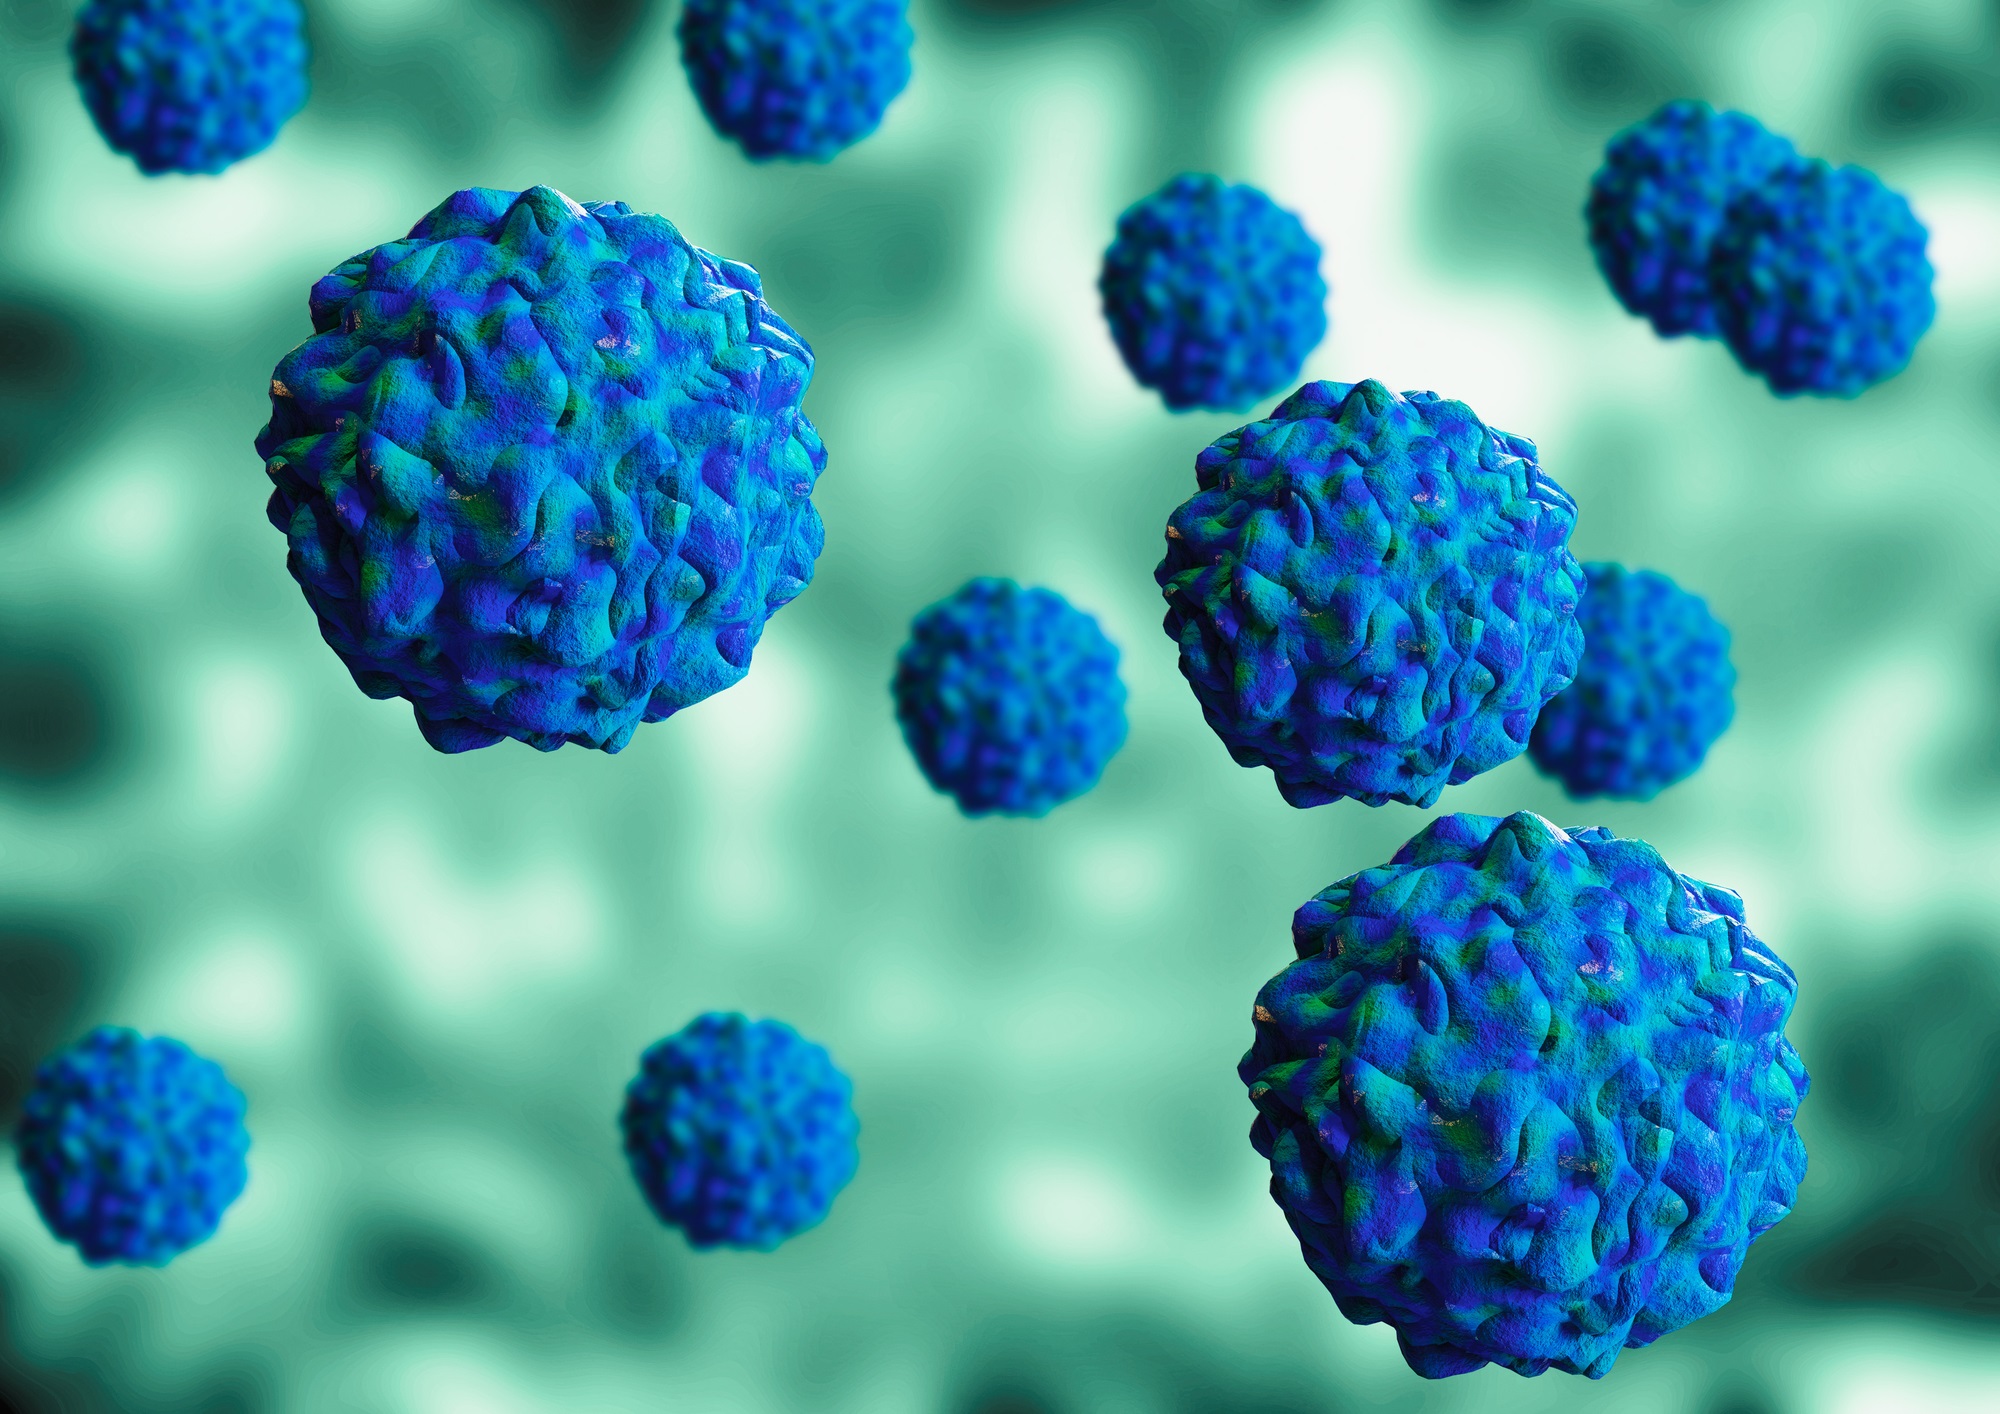 Poliovirus particles in blue and green in a digital rendering